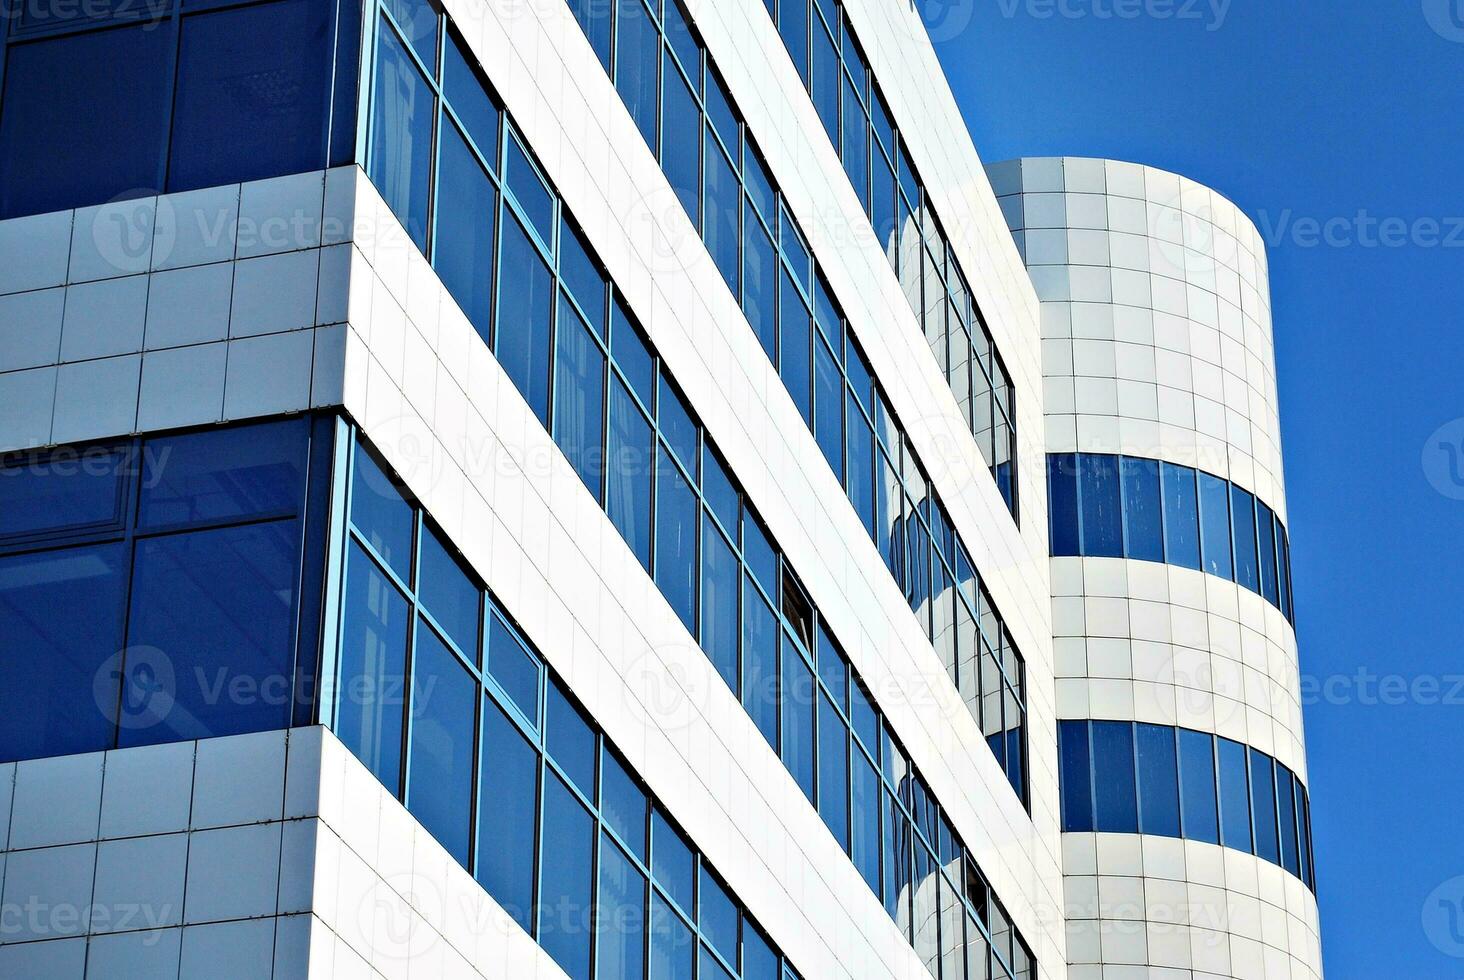 Modern office building in the city with windows and  steel and aluminum panels wall. Contemporary commercial architecture, vertical converging geometric lines. photo